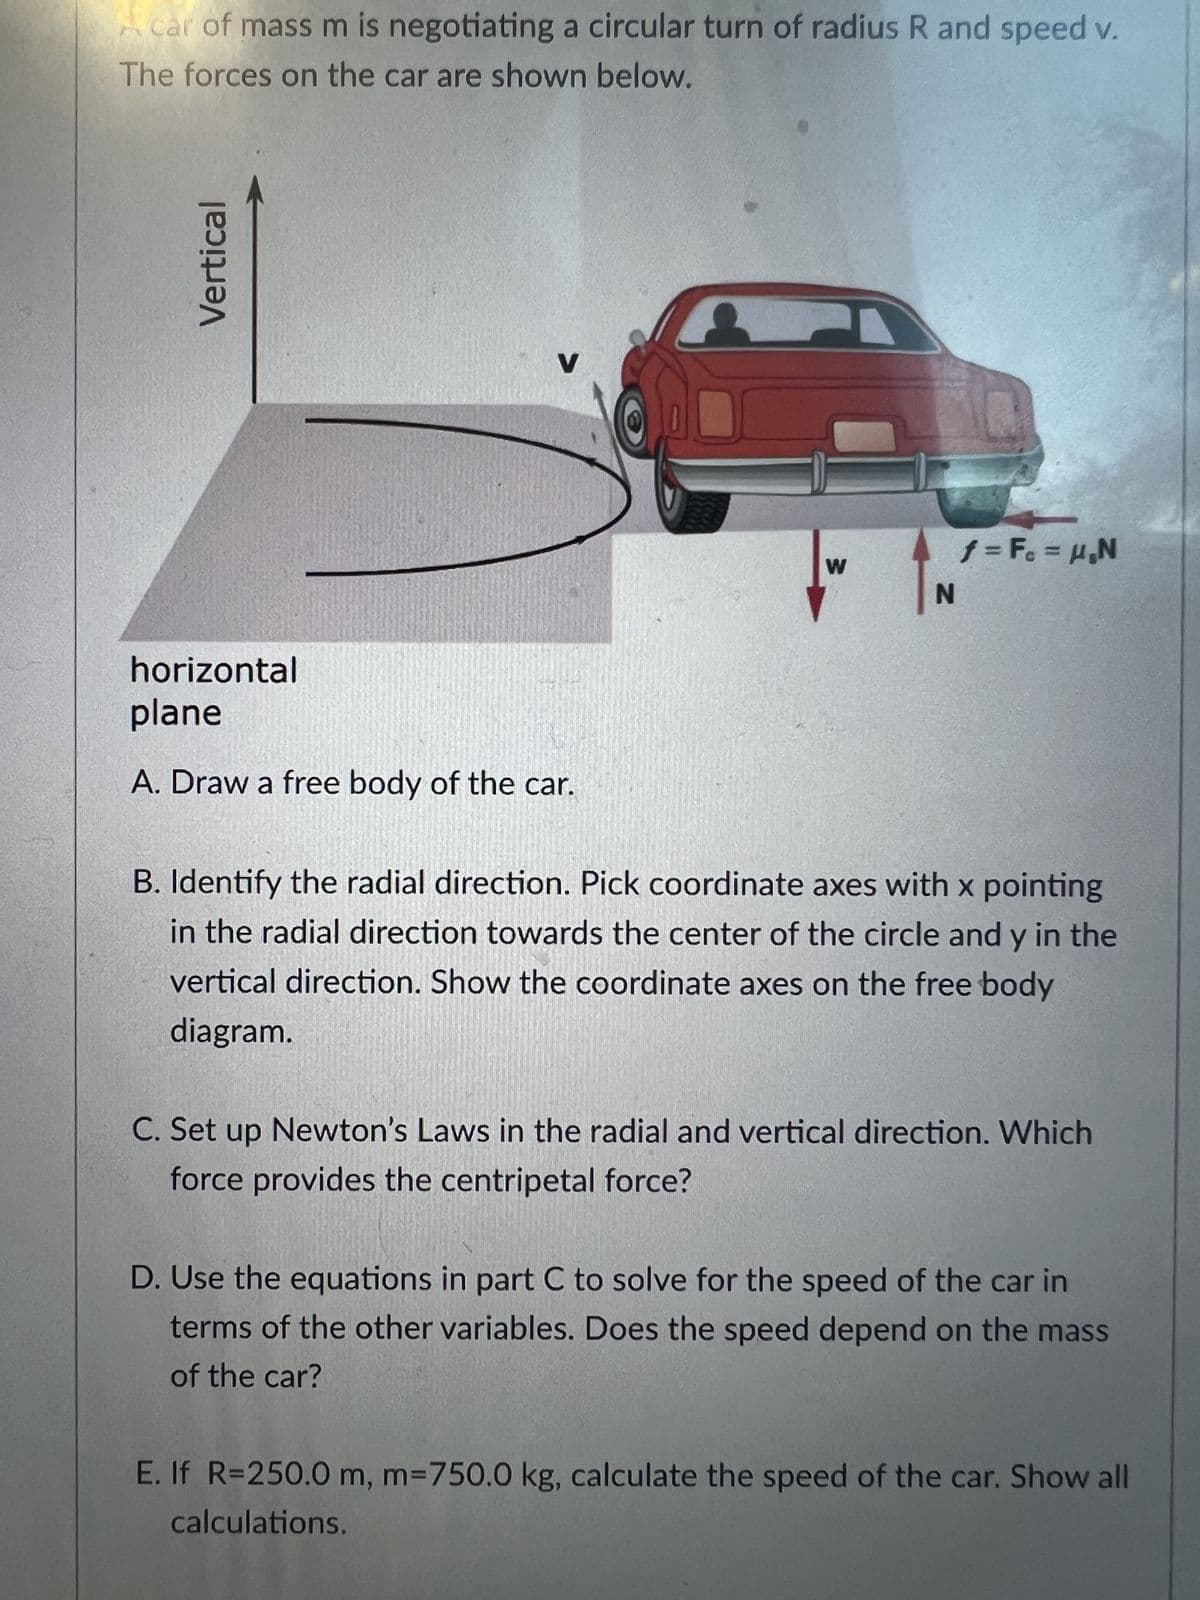 car of mass m is negotiating a circular turn of radius R and speed v.
The forces on the car are shown below.
Vertical
V
horizontal
plane
A. Draw a free body of the car.
W
f = F₁ = H₂N
B. Identify the radial direction. Pick coordinate axes with x pointing
in the radial direction towards the center of the circle and y in the
vertical direction. Show the coordinate axes on the free body
diagram.
C. Set up Newton's Laws in the radial and vertical direction. Which
force provides the centripetal force?
D. Use the equations in part C to solve for the speed of the car in
terms of the other variables. Does the speed depend on the mass
of the car?
E. If R=250.0 m, m=750.0 kg, calculate the speed of the car. Show all
calculations.